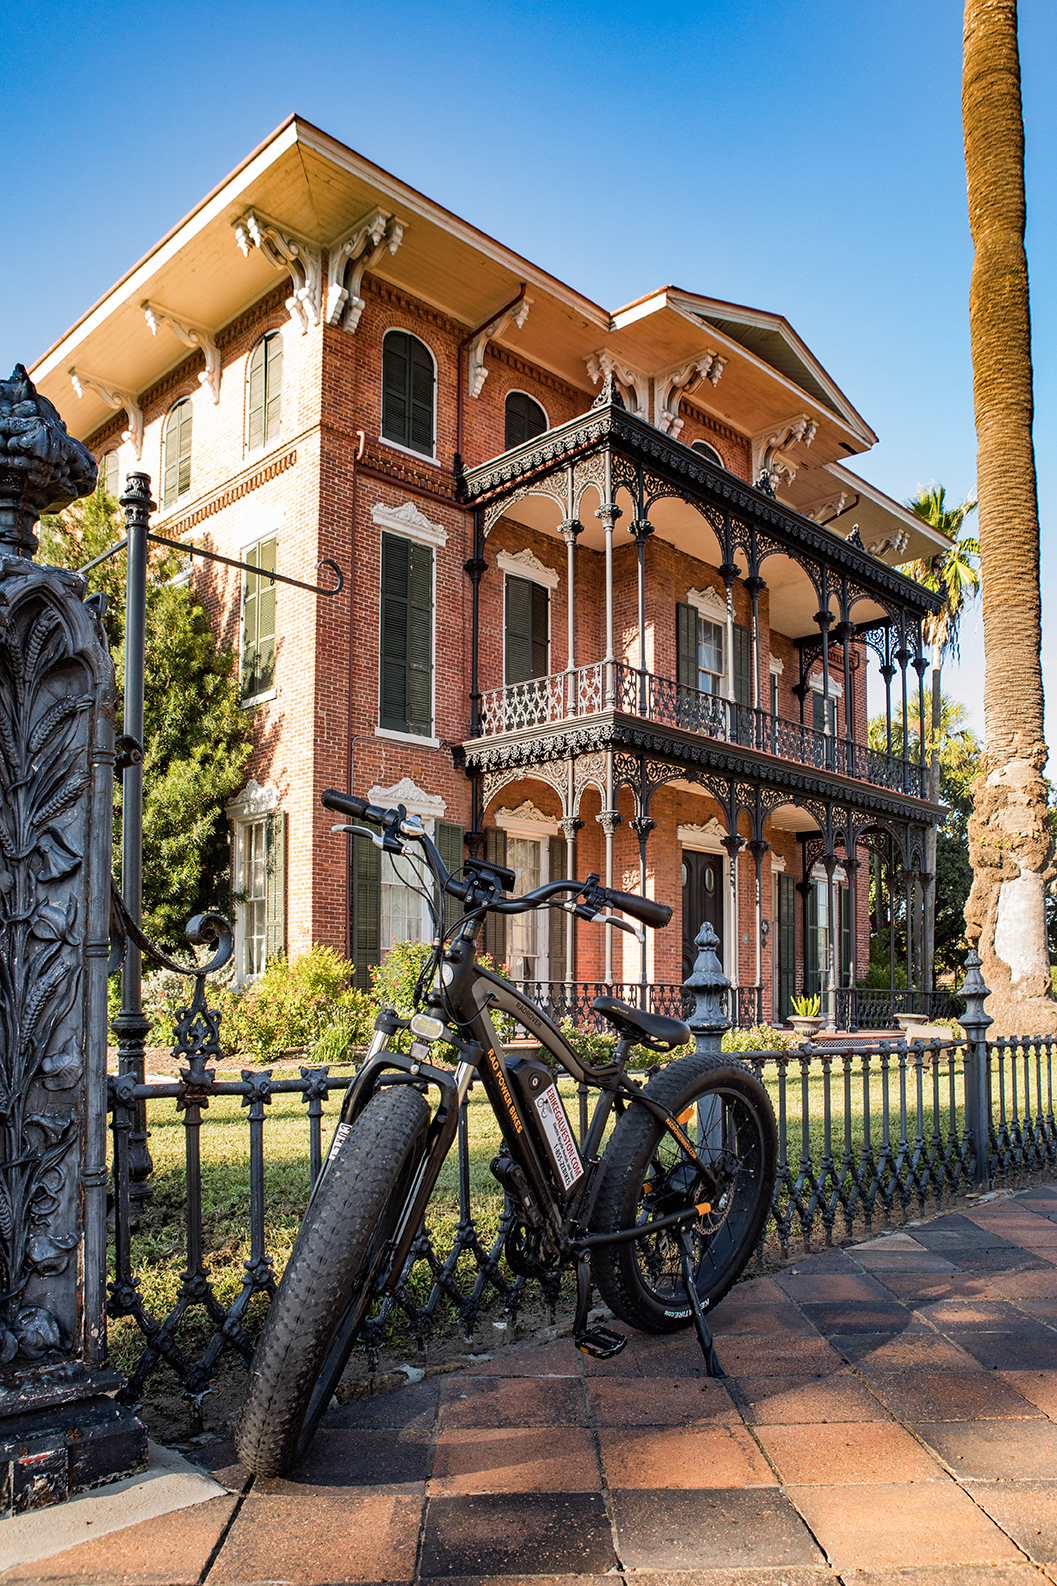 Zip E Bikes, located right across the street from The Tremont House, is a great way to see the sights around the island. 